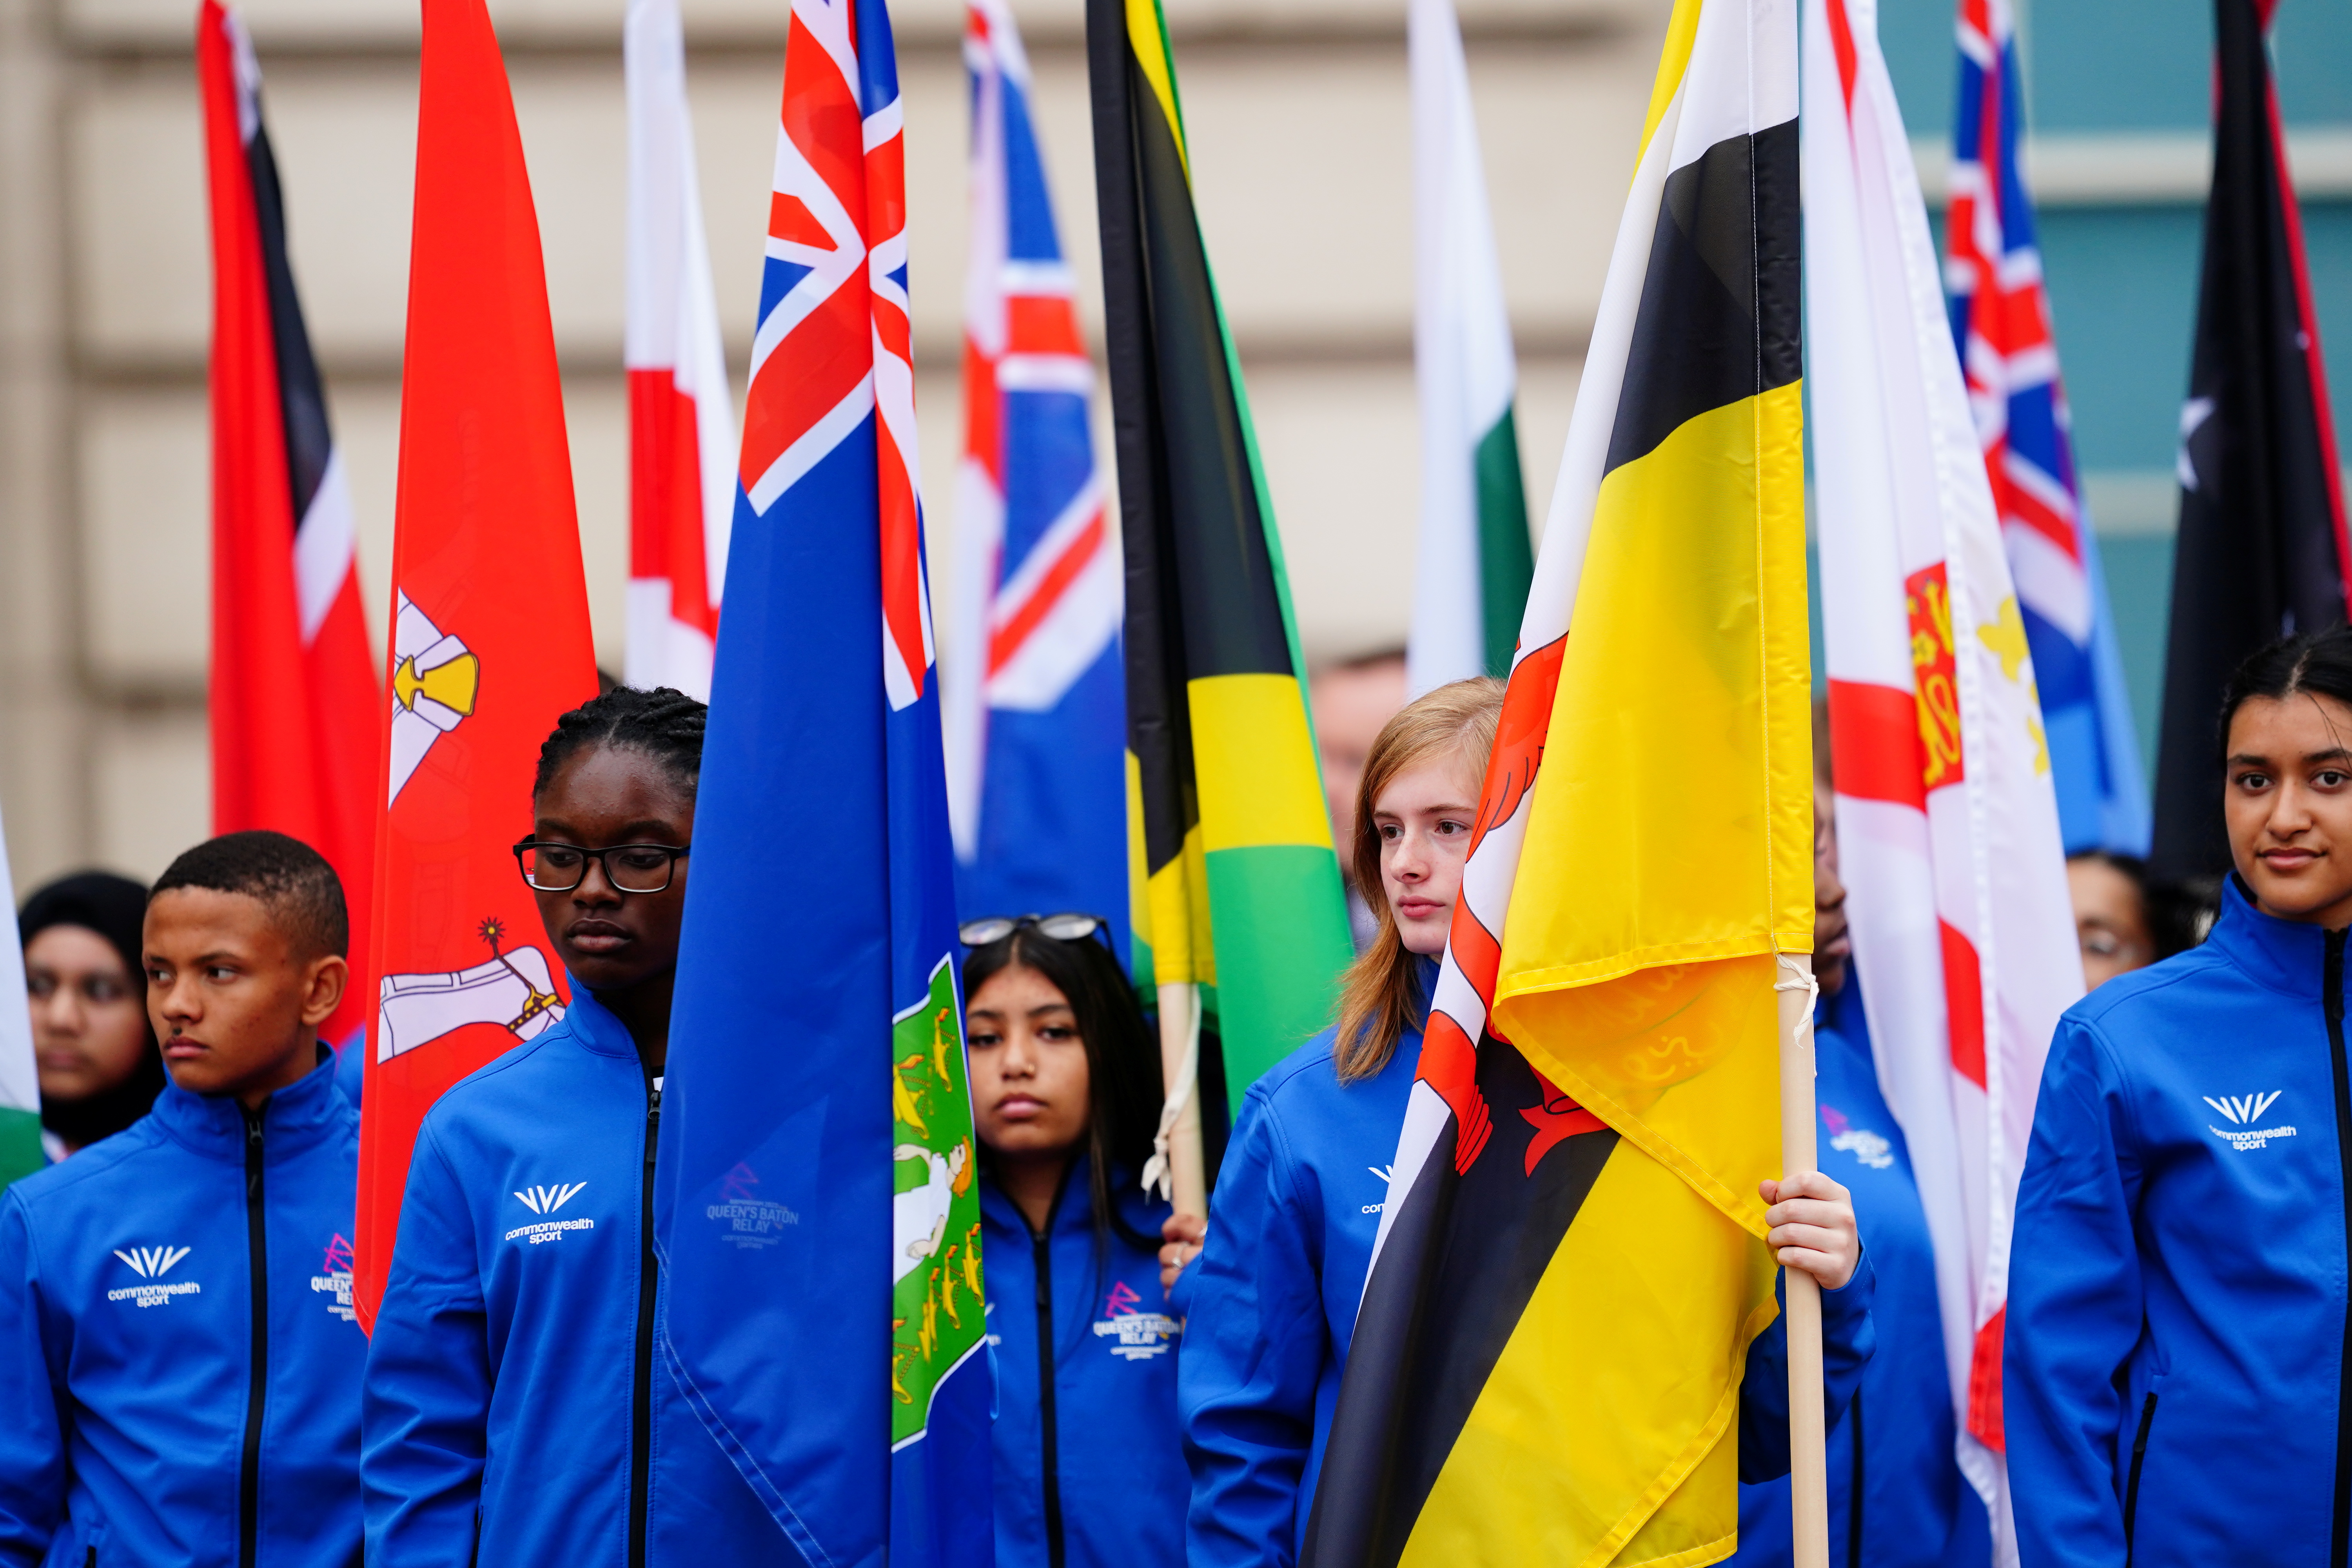 People carry the flags of the Commonwealth countries at the launch of the Commonwealth Games baton relay, outside Buckingham Palace in London, Britain October 7, 2021. Victoria Jones/Pool via REUTERS